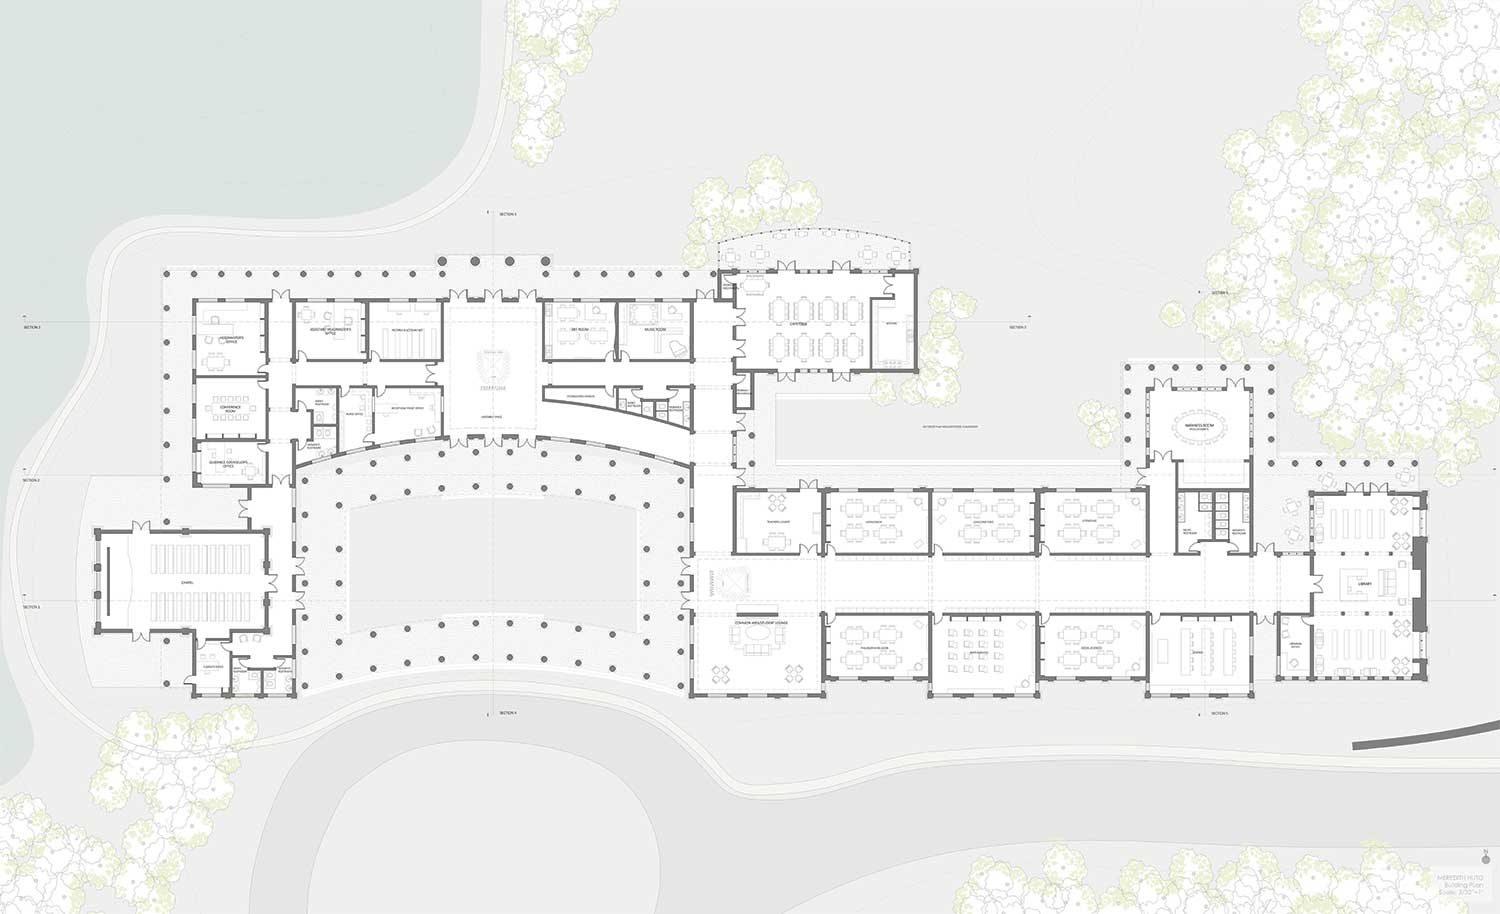 detailed floor plan showing interior of numerous buildings